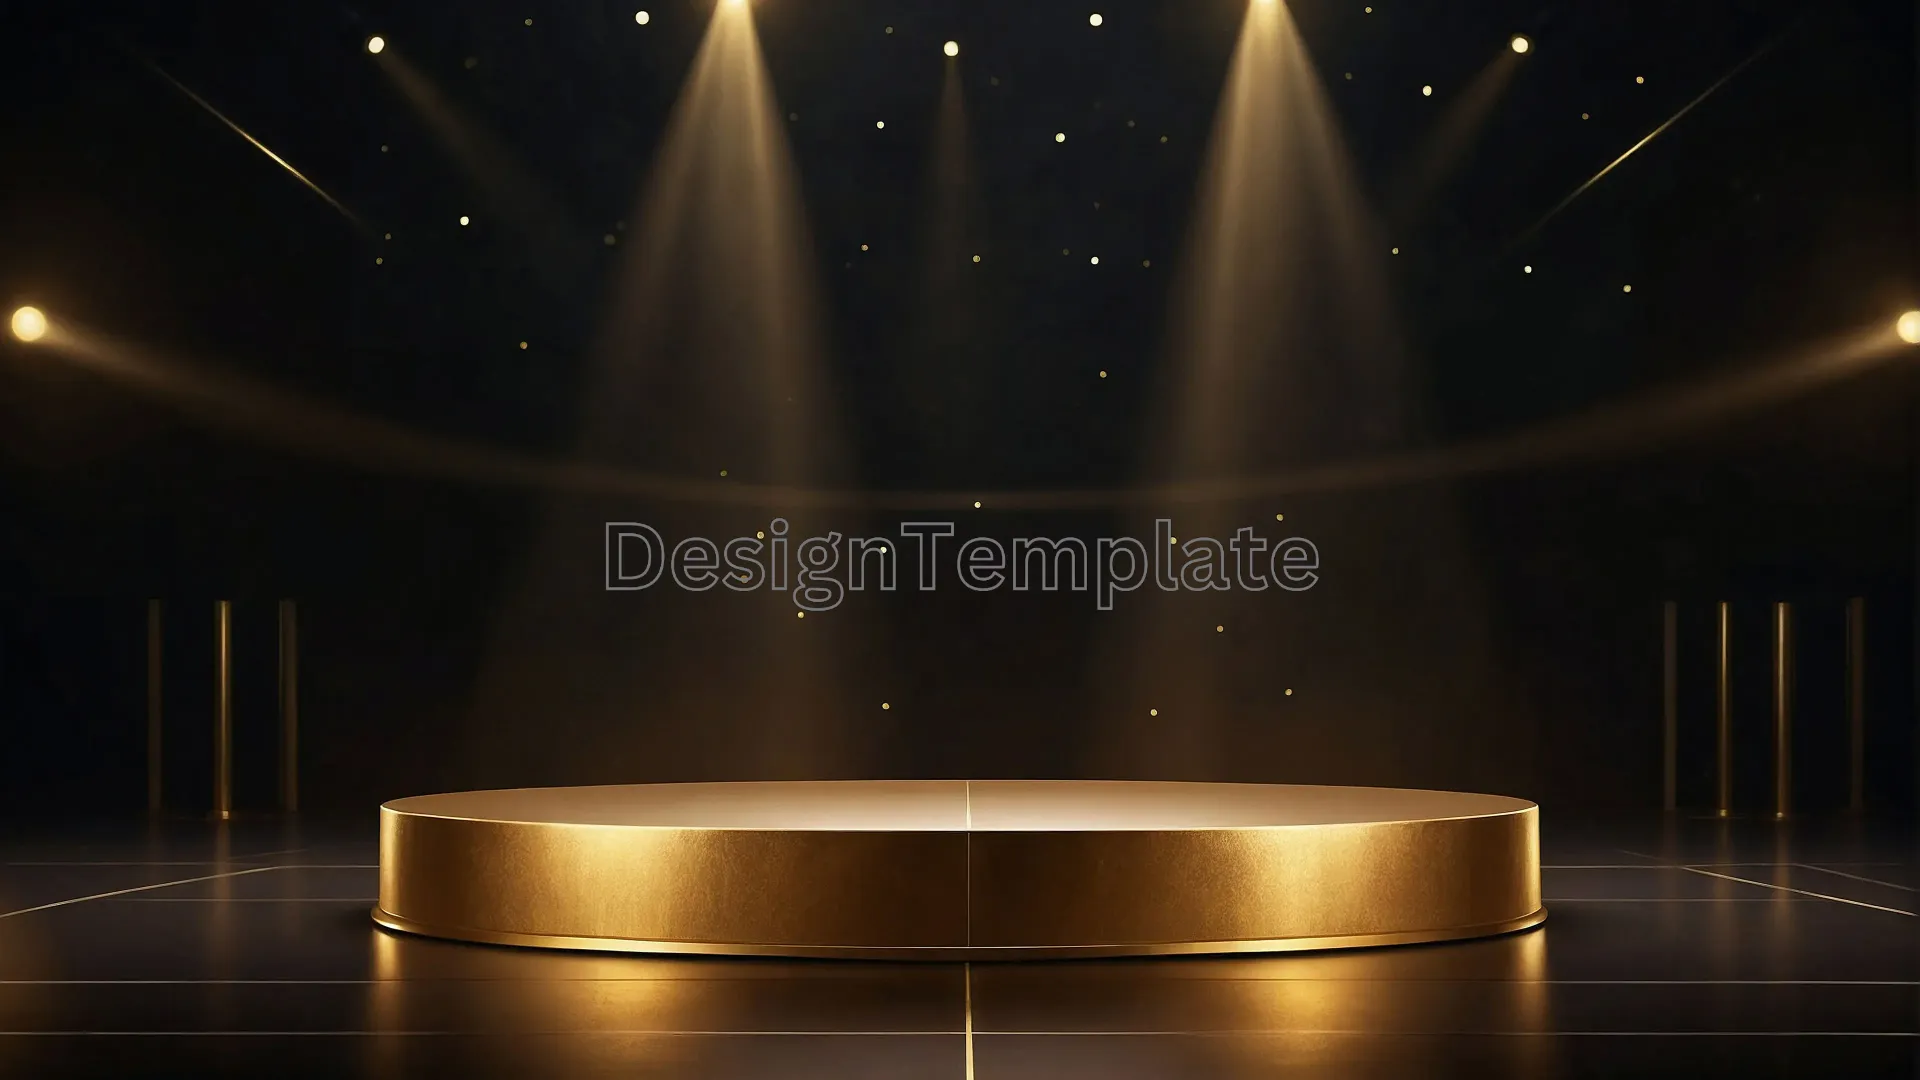 Gold Podium Texture Circular Podium in the Middle on a Dark Background Image